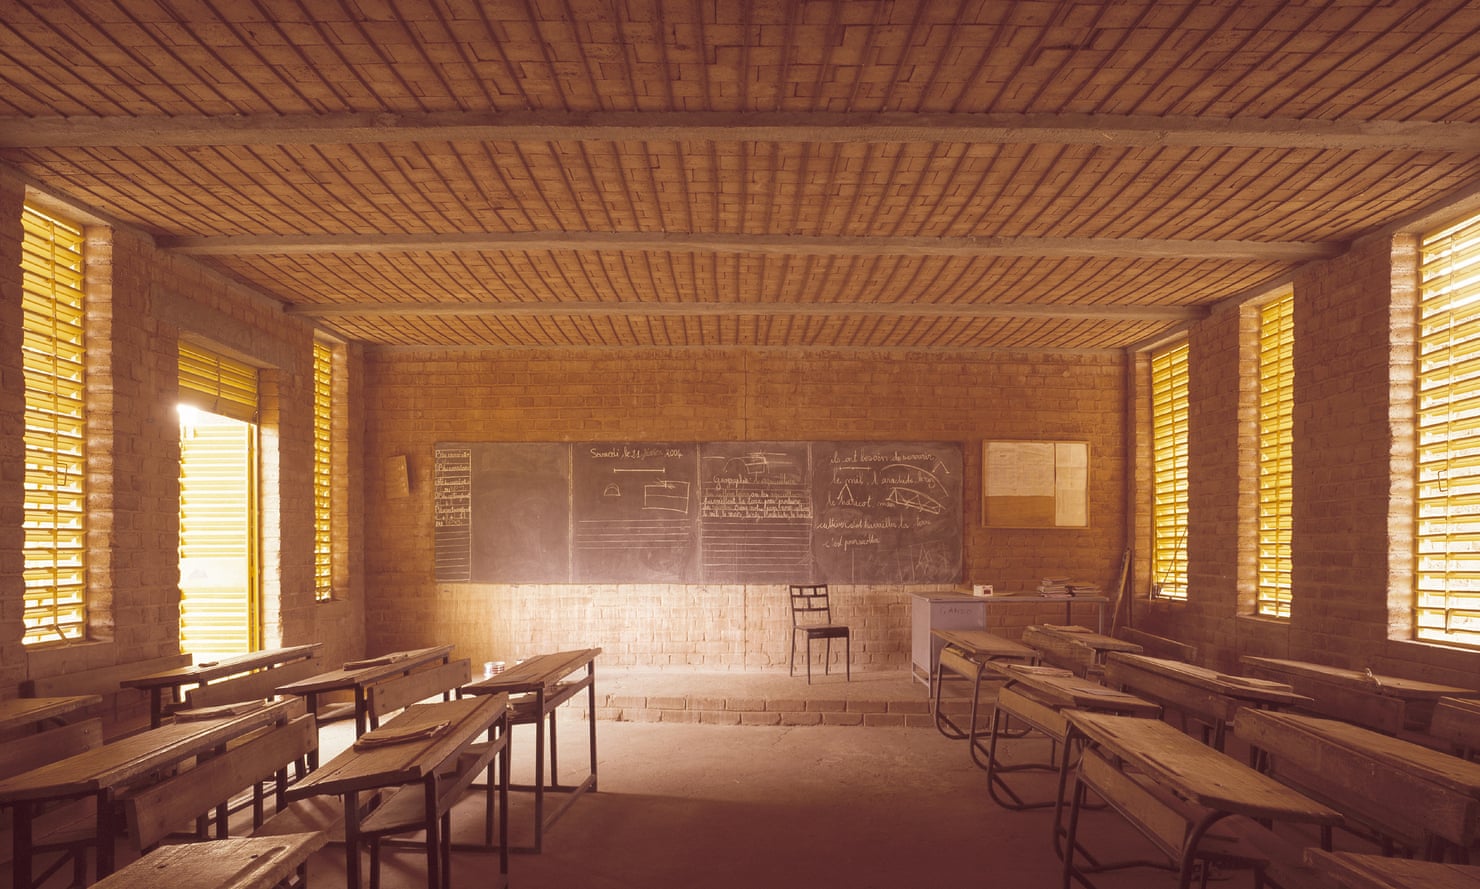 A classroom in Gando primary school, with red brick walls, wooden slats on the windows, wooden benches and a blackboard.